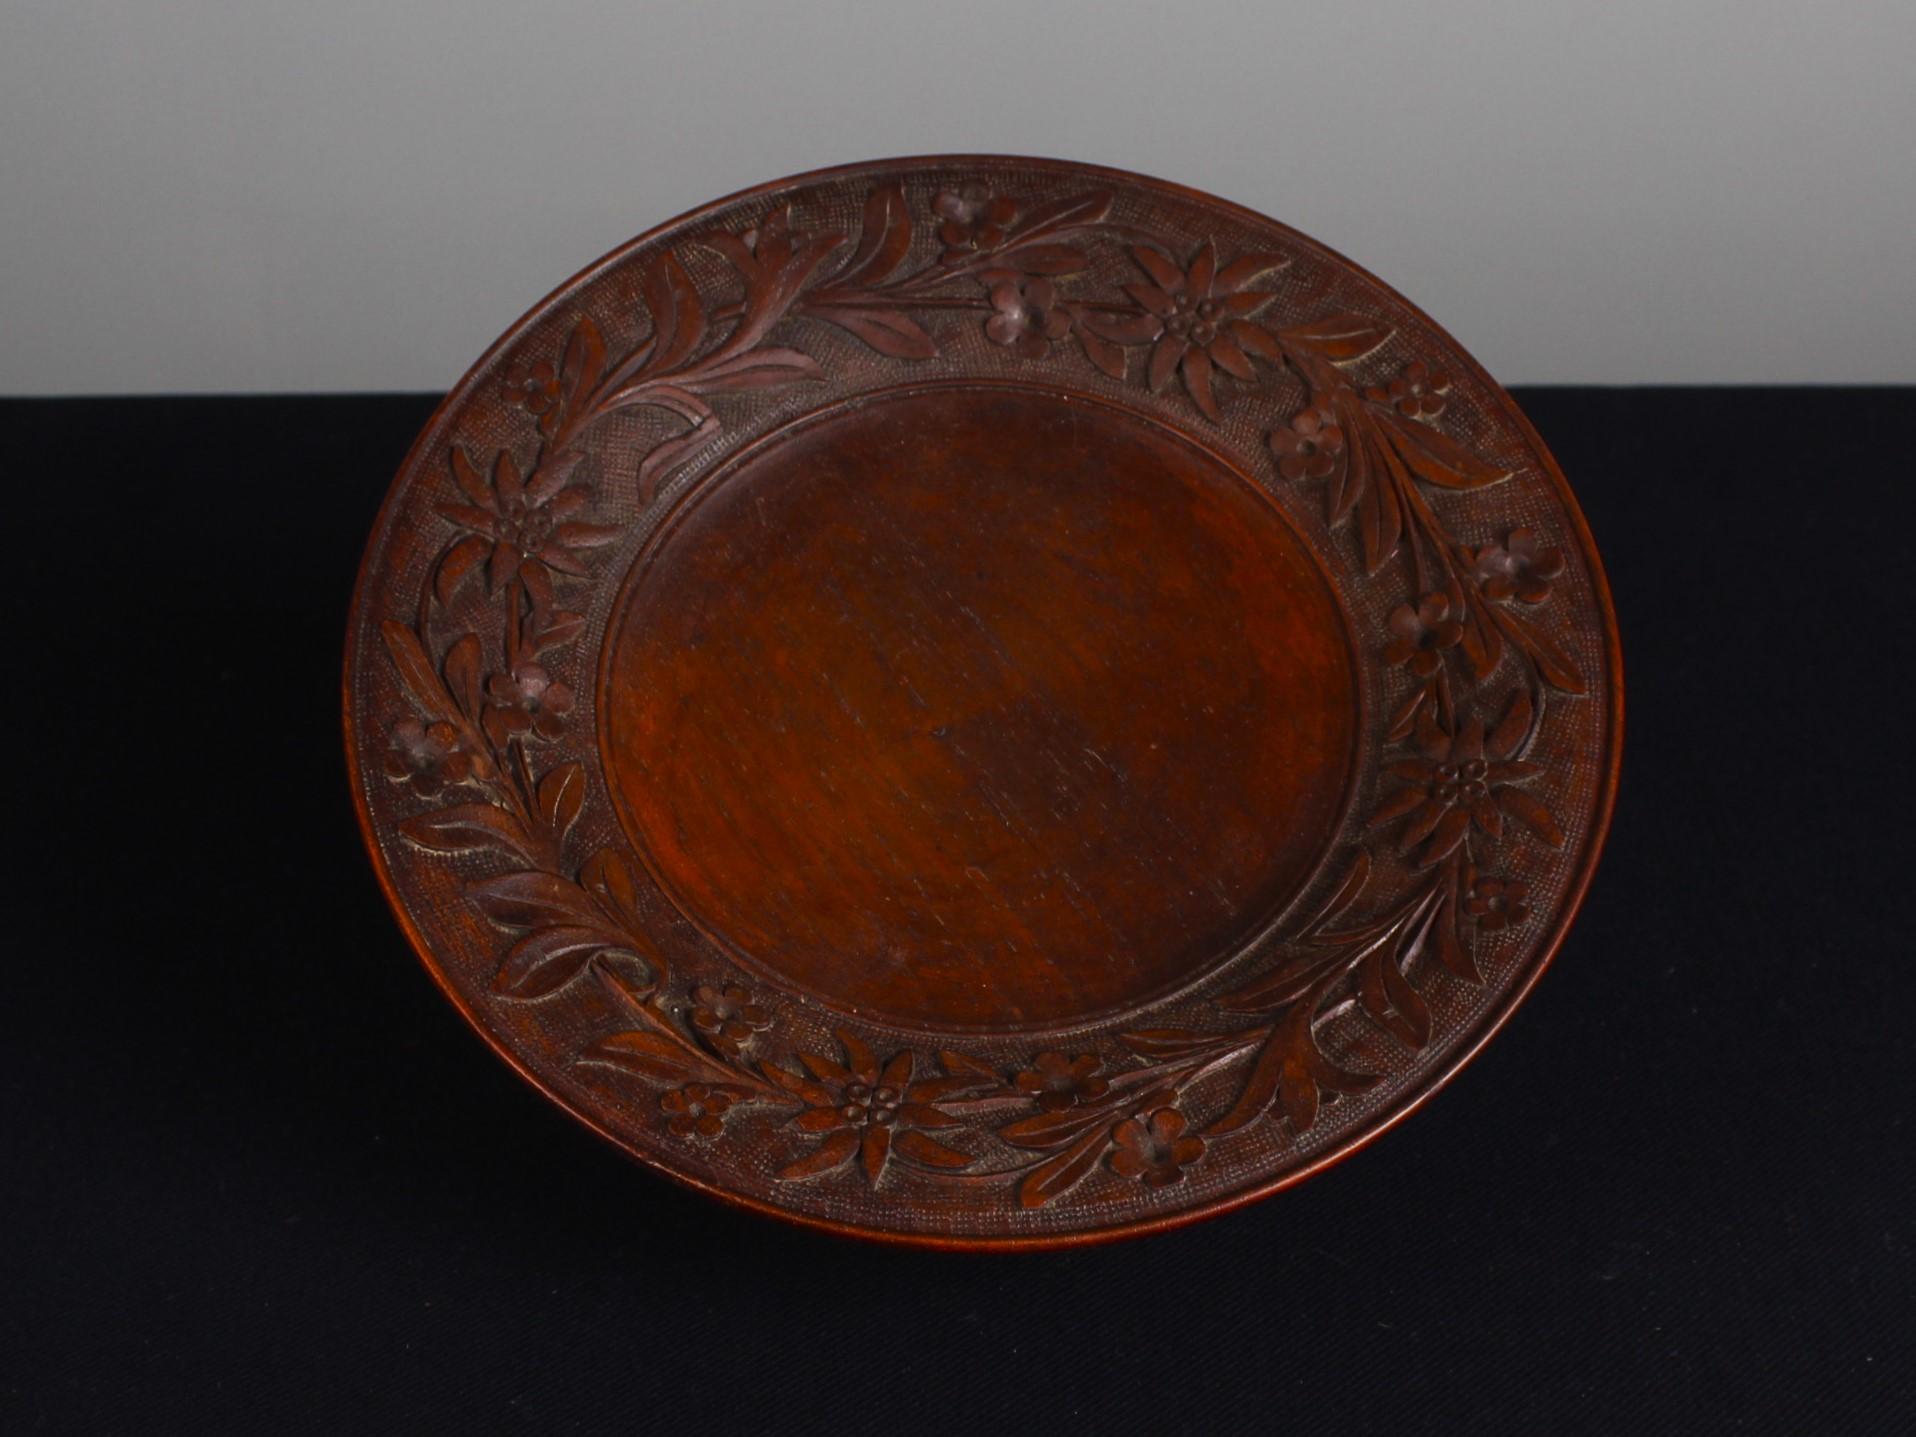 This beautiful hand-carved Black Forest serving plate hides a music box in its base. An extraordinary piece of folk art from the mid-20th century.
The music box can be operated with a key and has an automatic trigger that starts playing the melody